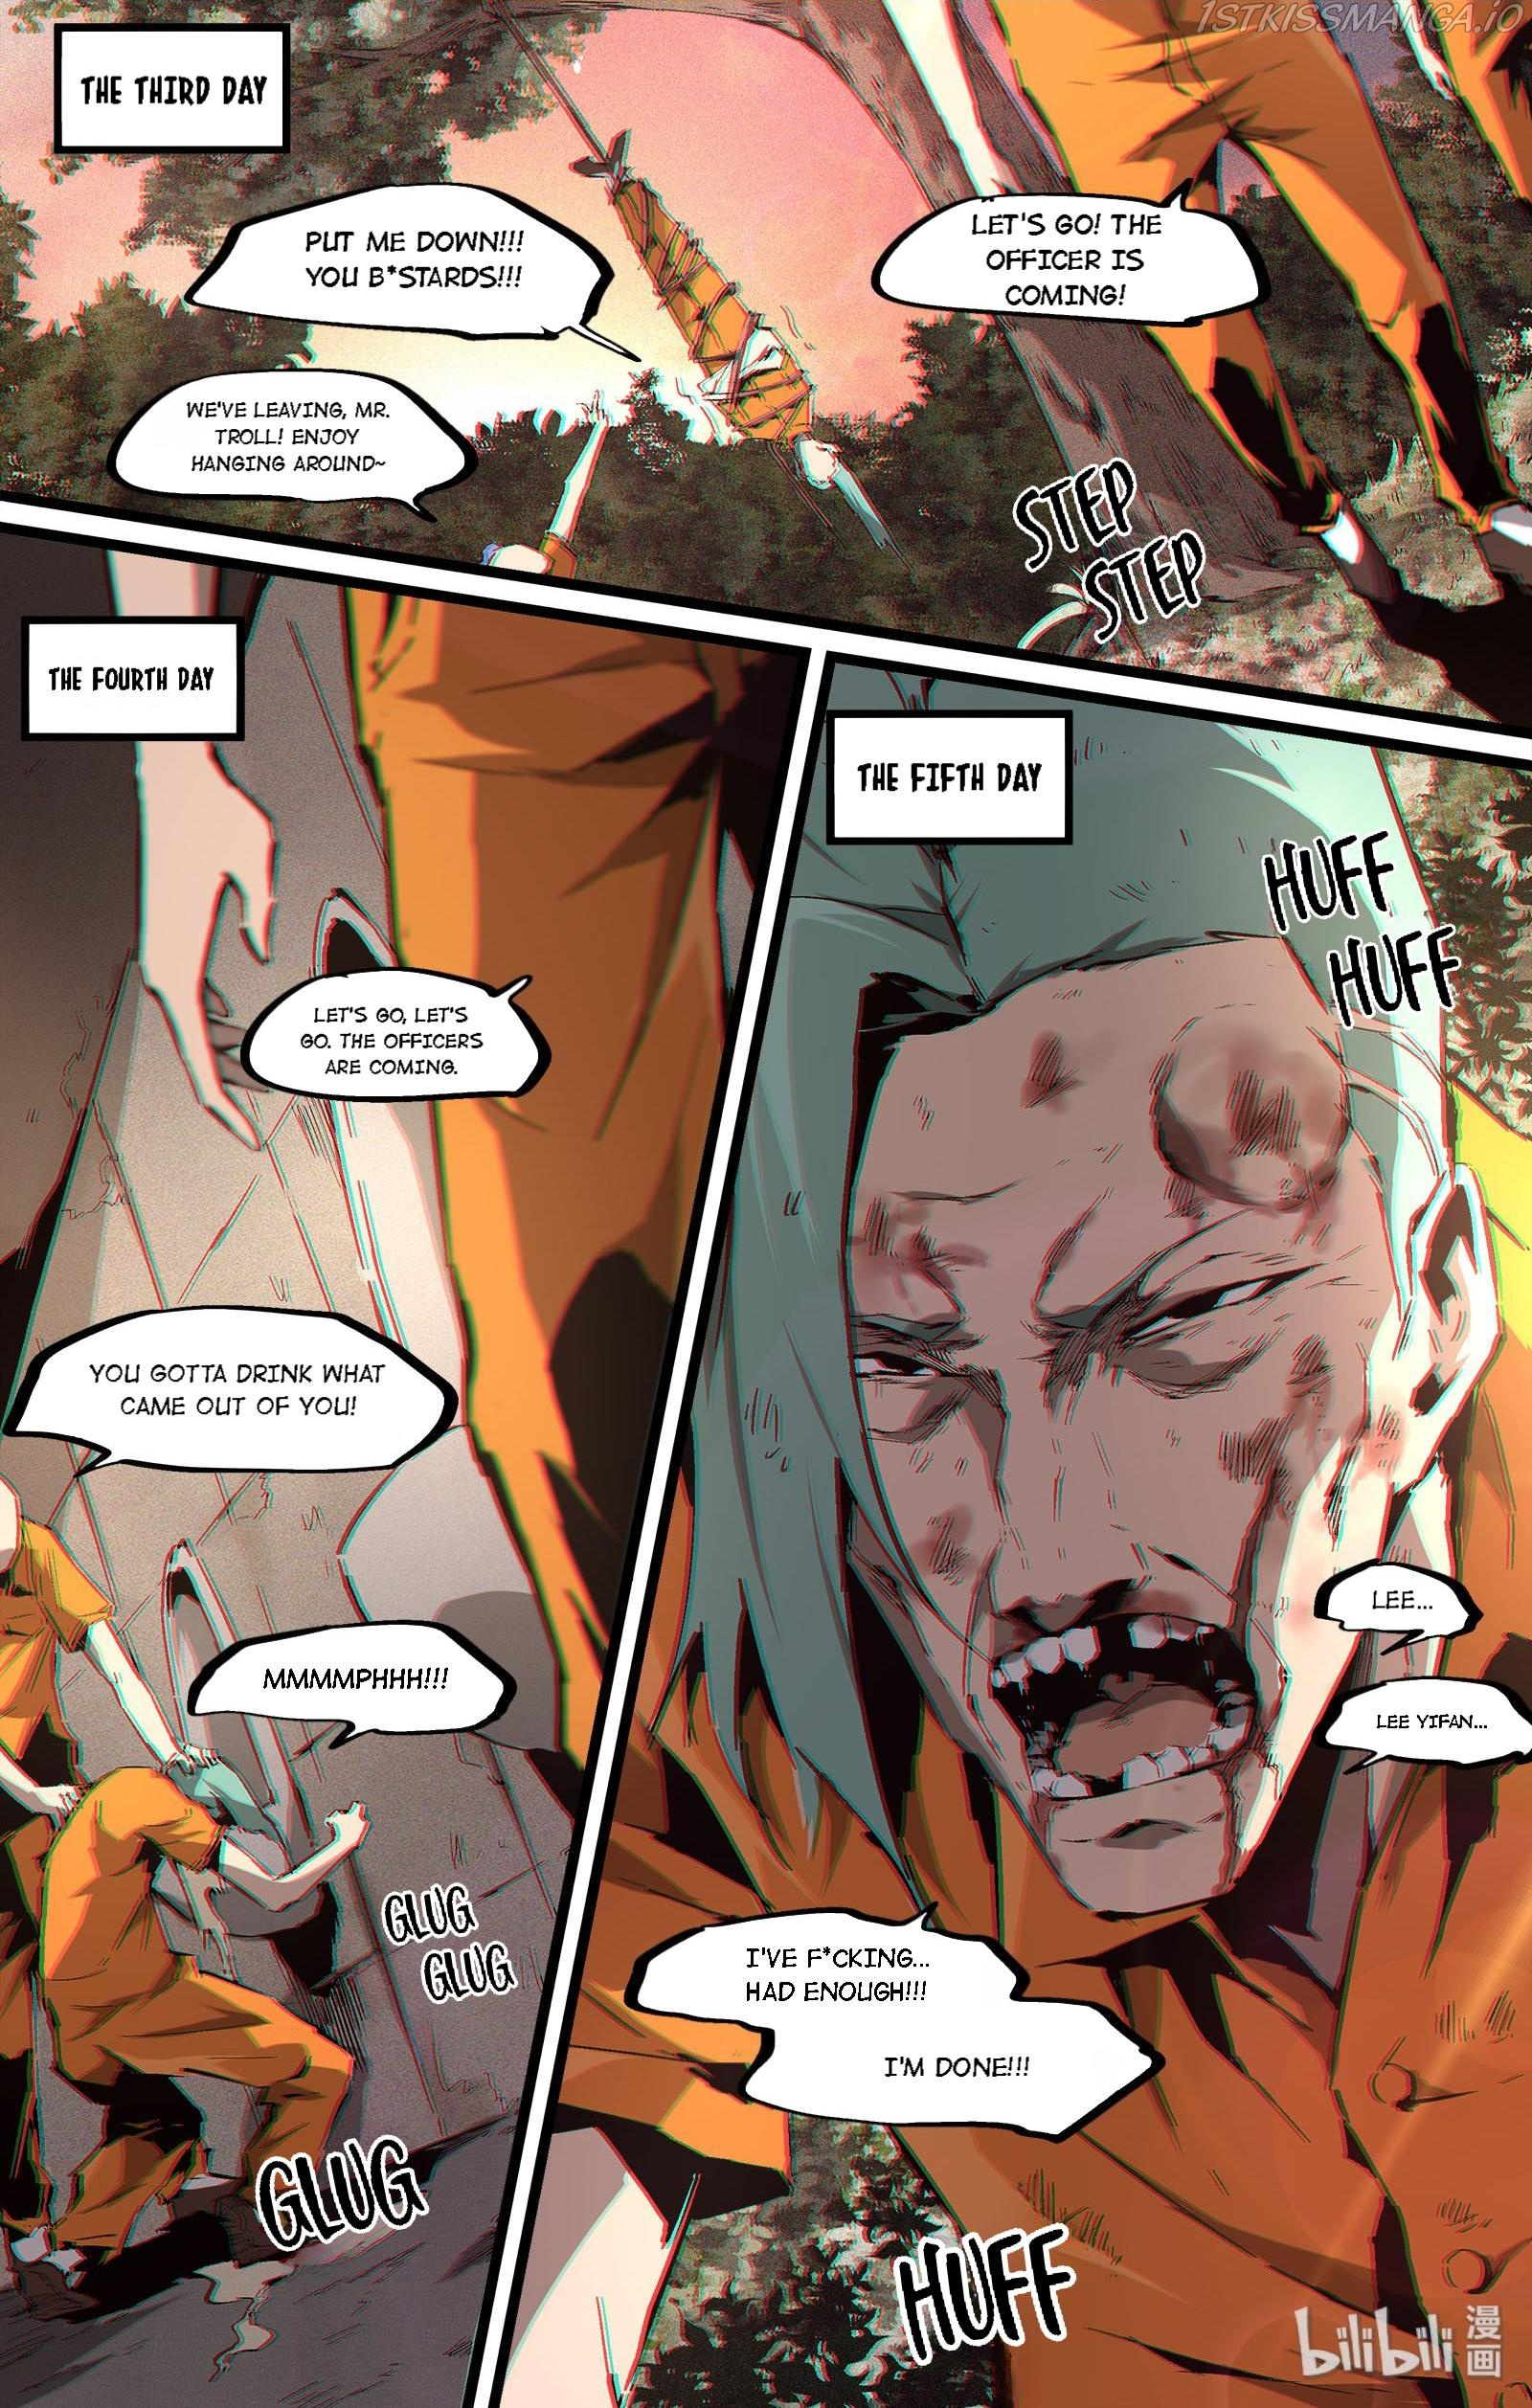 Lawless Zone - 126 page 14-15bd812c